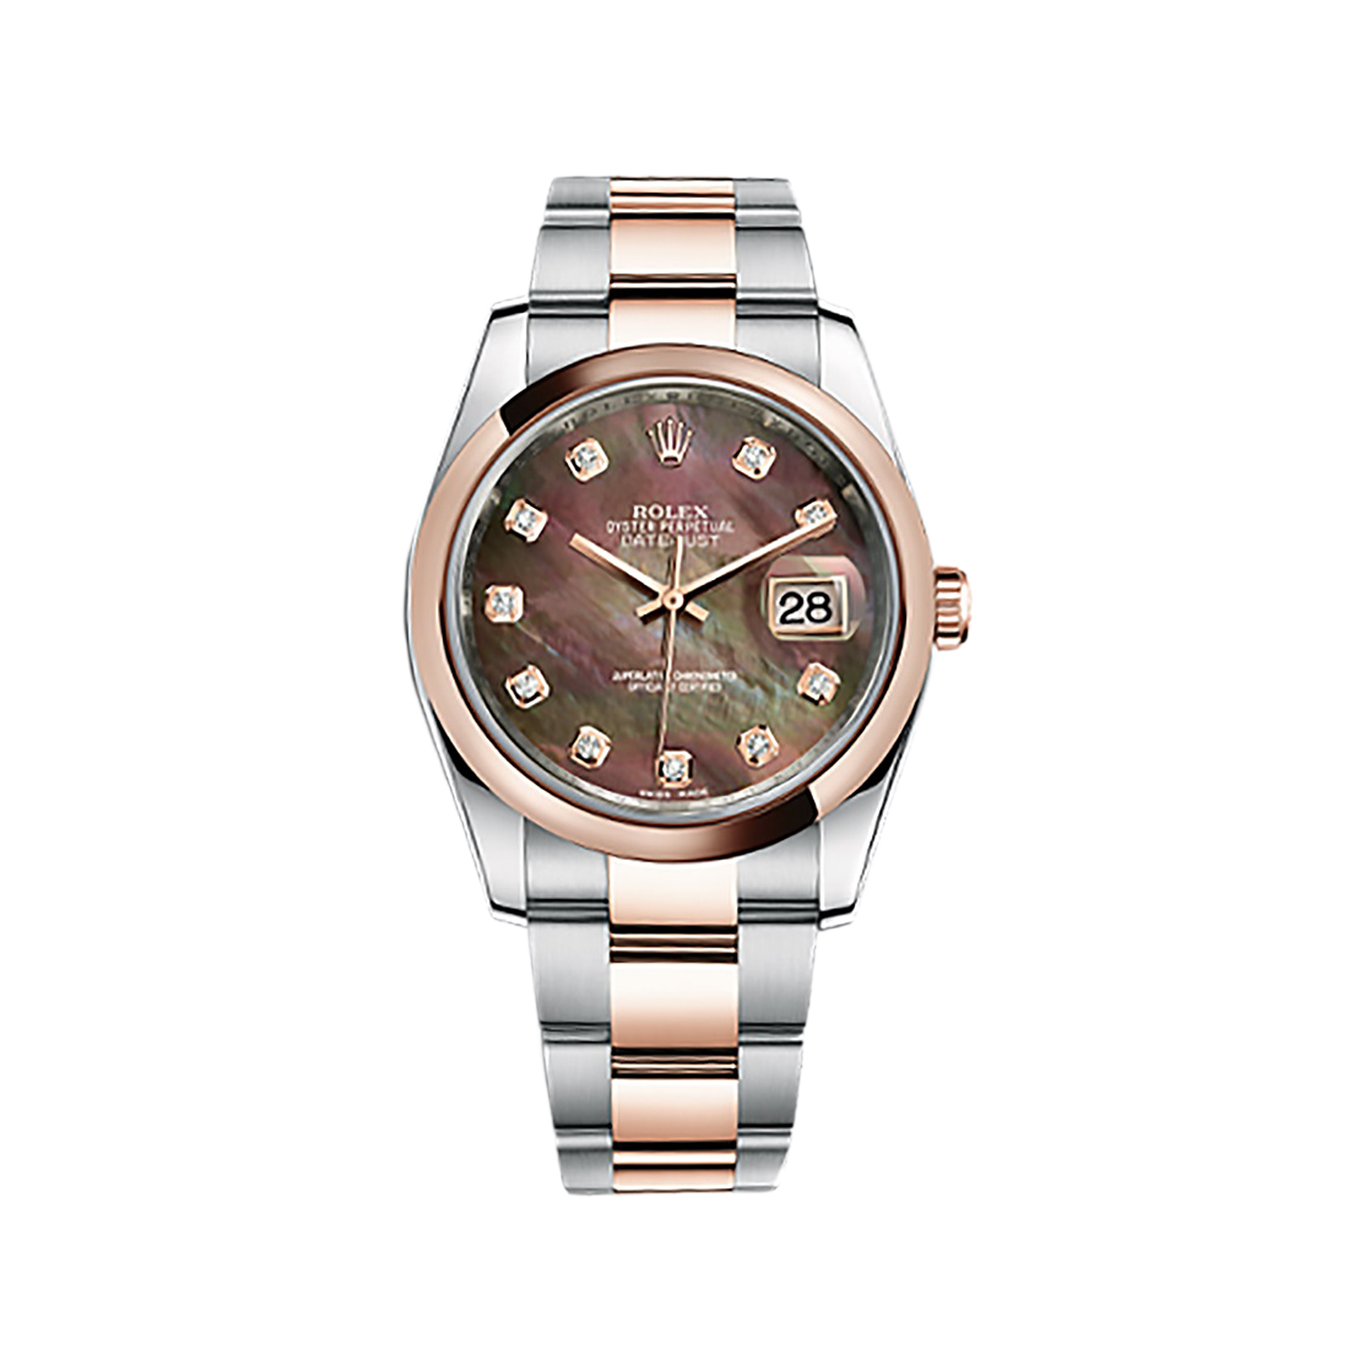 Datejust 36 116201 Rose Gold & Stainless Steel Watch (Black Mother-of-Pearl Set with Diamonds)